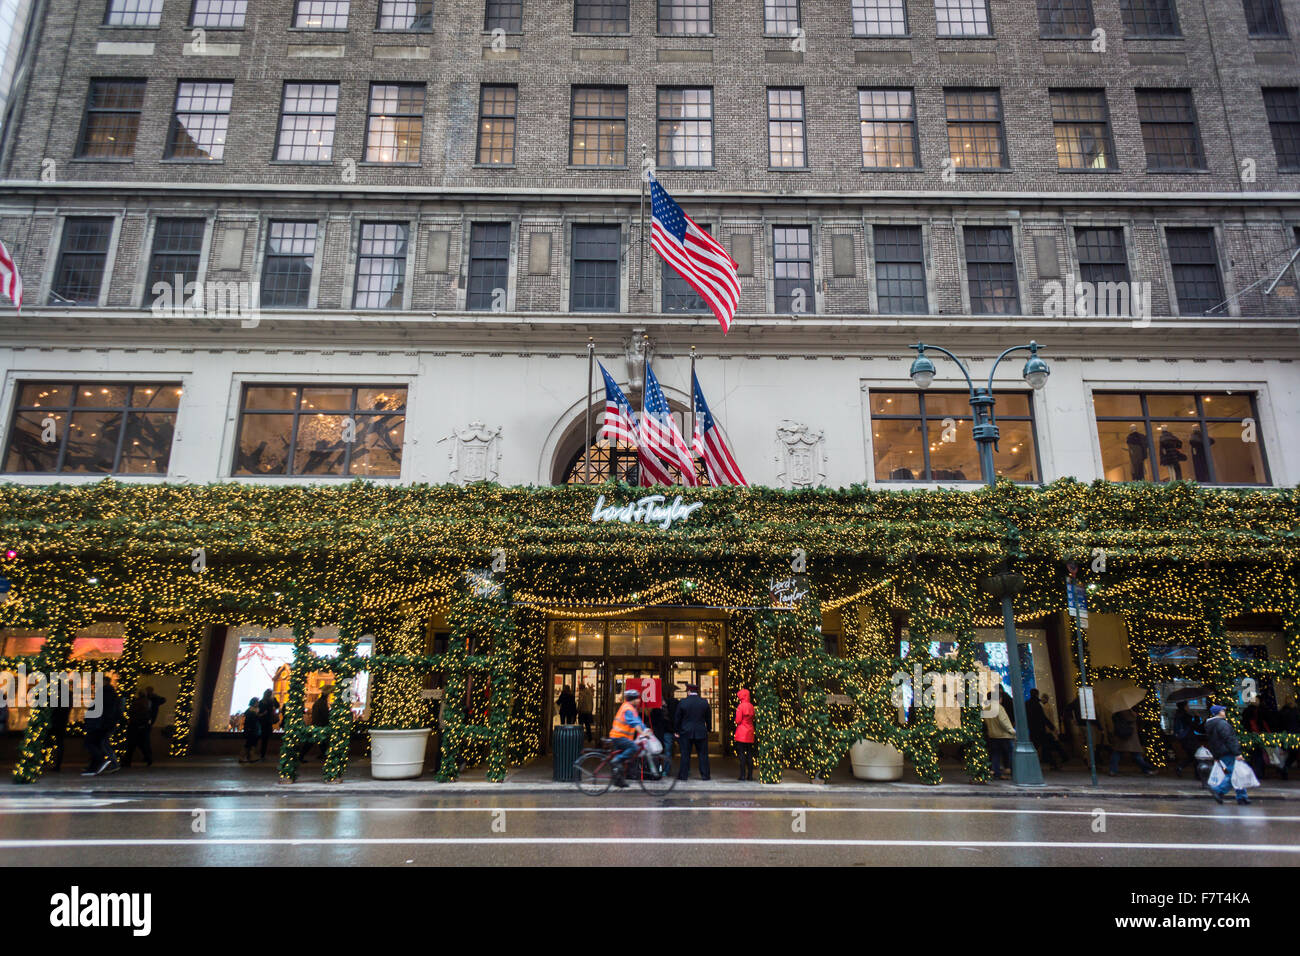 Lord & Taylor in New York, currently suffering the indignity of scaffolding in front of their main entrance, turns lemons into lemonade by turning the construction shed into an illuminated arcade, seen on Tuesday, December 1, 2015.  (© Richard B. Levine) Stock Photo